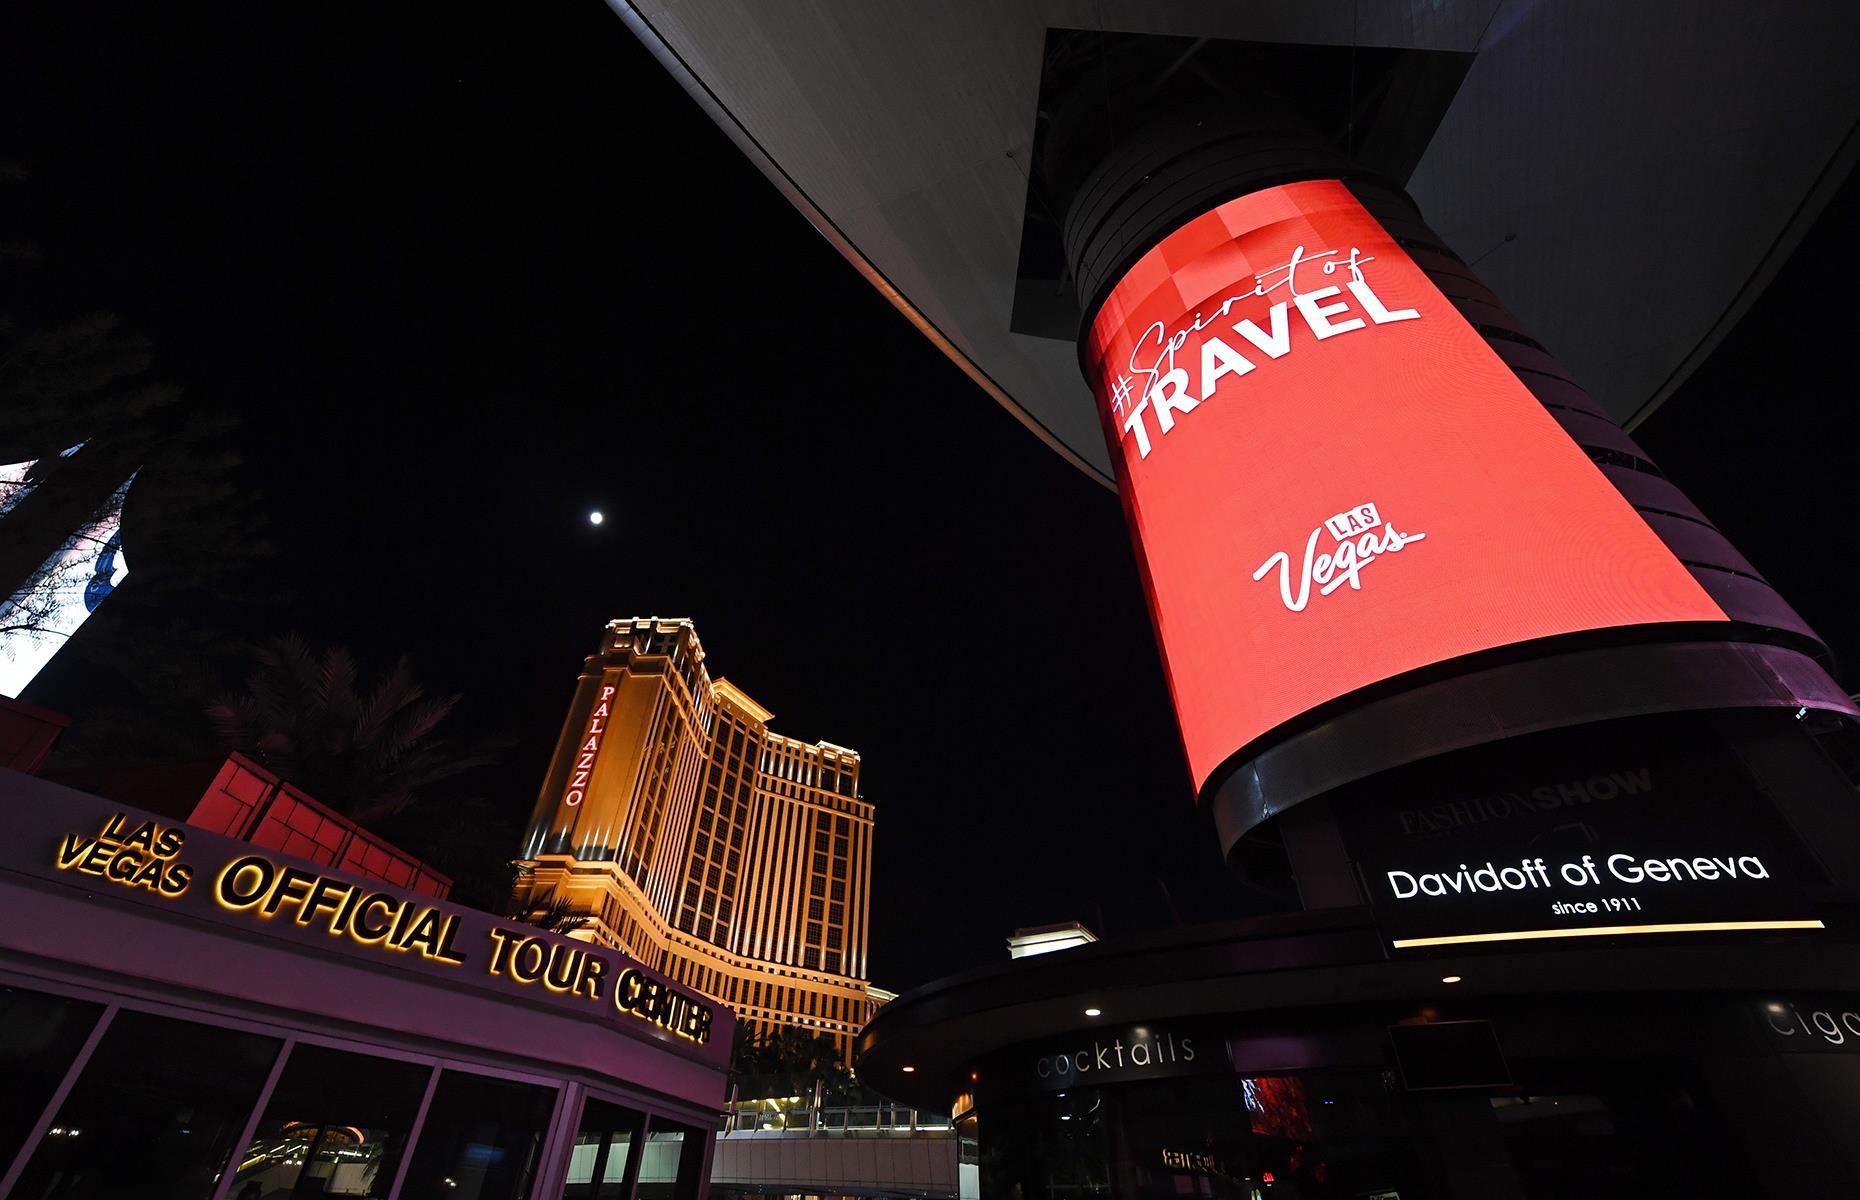 <p>The start of the 2020s saw a curveball thrown at the travel industry: the COVID-19 pandemic. Popular destinations, such as Las Vegas (pictured), had their income from tourism almost completely slashed overnight, as lockdowns took hold and flights were canceled. However, when Americans were allowed to travel within the USA again, road trips experienced a renaissance: <a href="https://thevacationer.com/summer-travel-survey-2022/">a survey for <em>Vacationer </em>magazine</a> estimated that 80% of Americans planned to take a road trip in 2022. Many were keen to avoid airports and flying for fear of contracting the virus, and the open road offered a safer way to satisfy the wanderlust.</p>